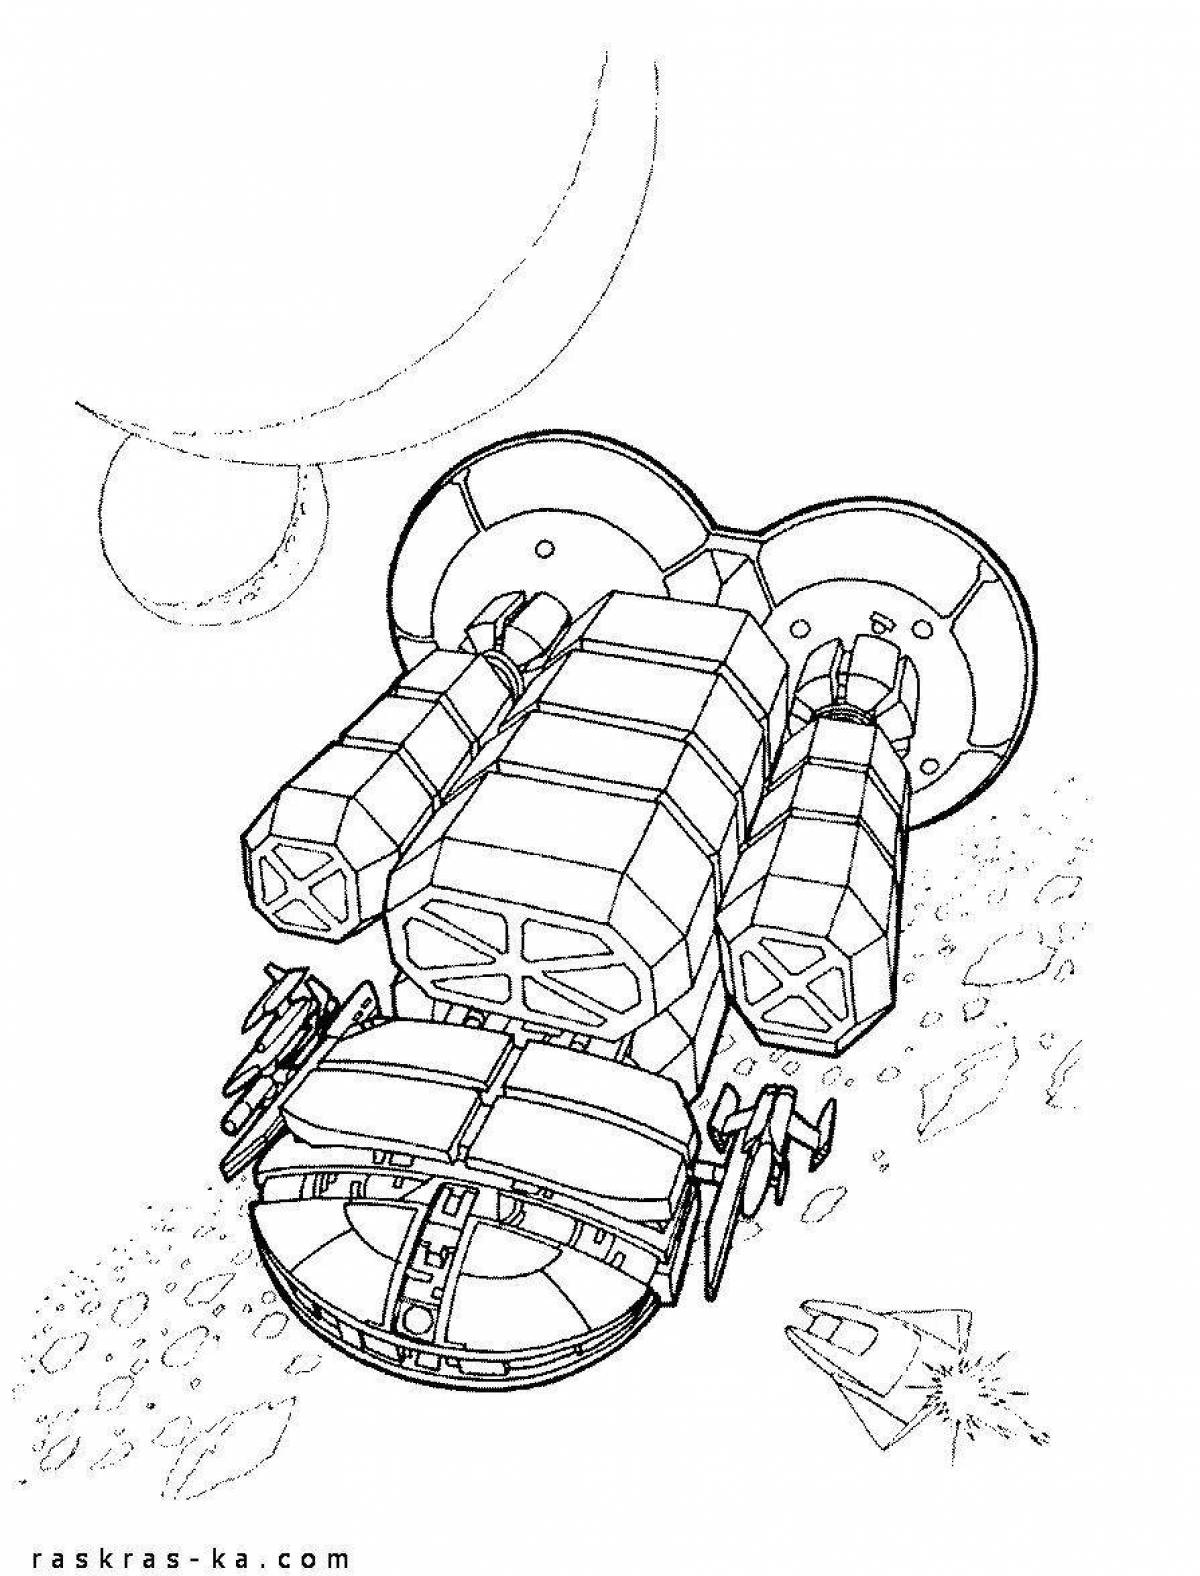 Cute among us spaceship coloring book